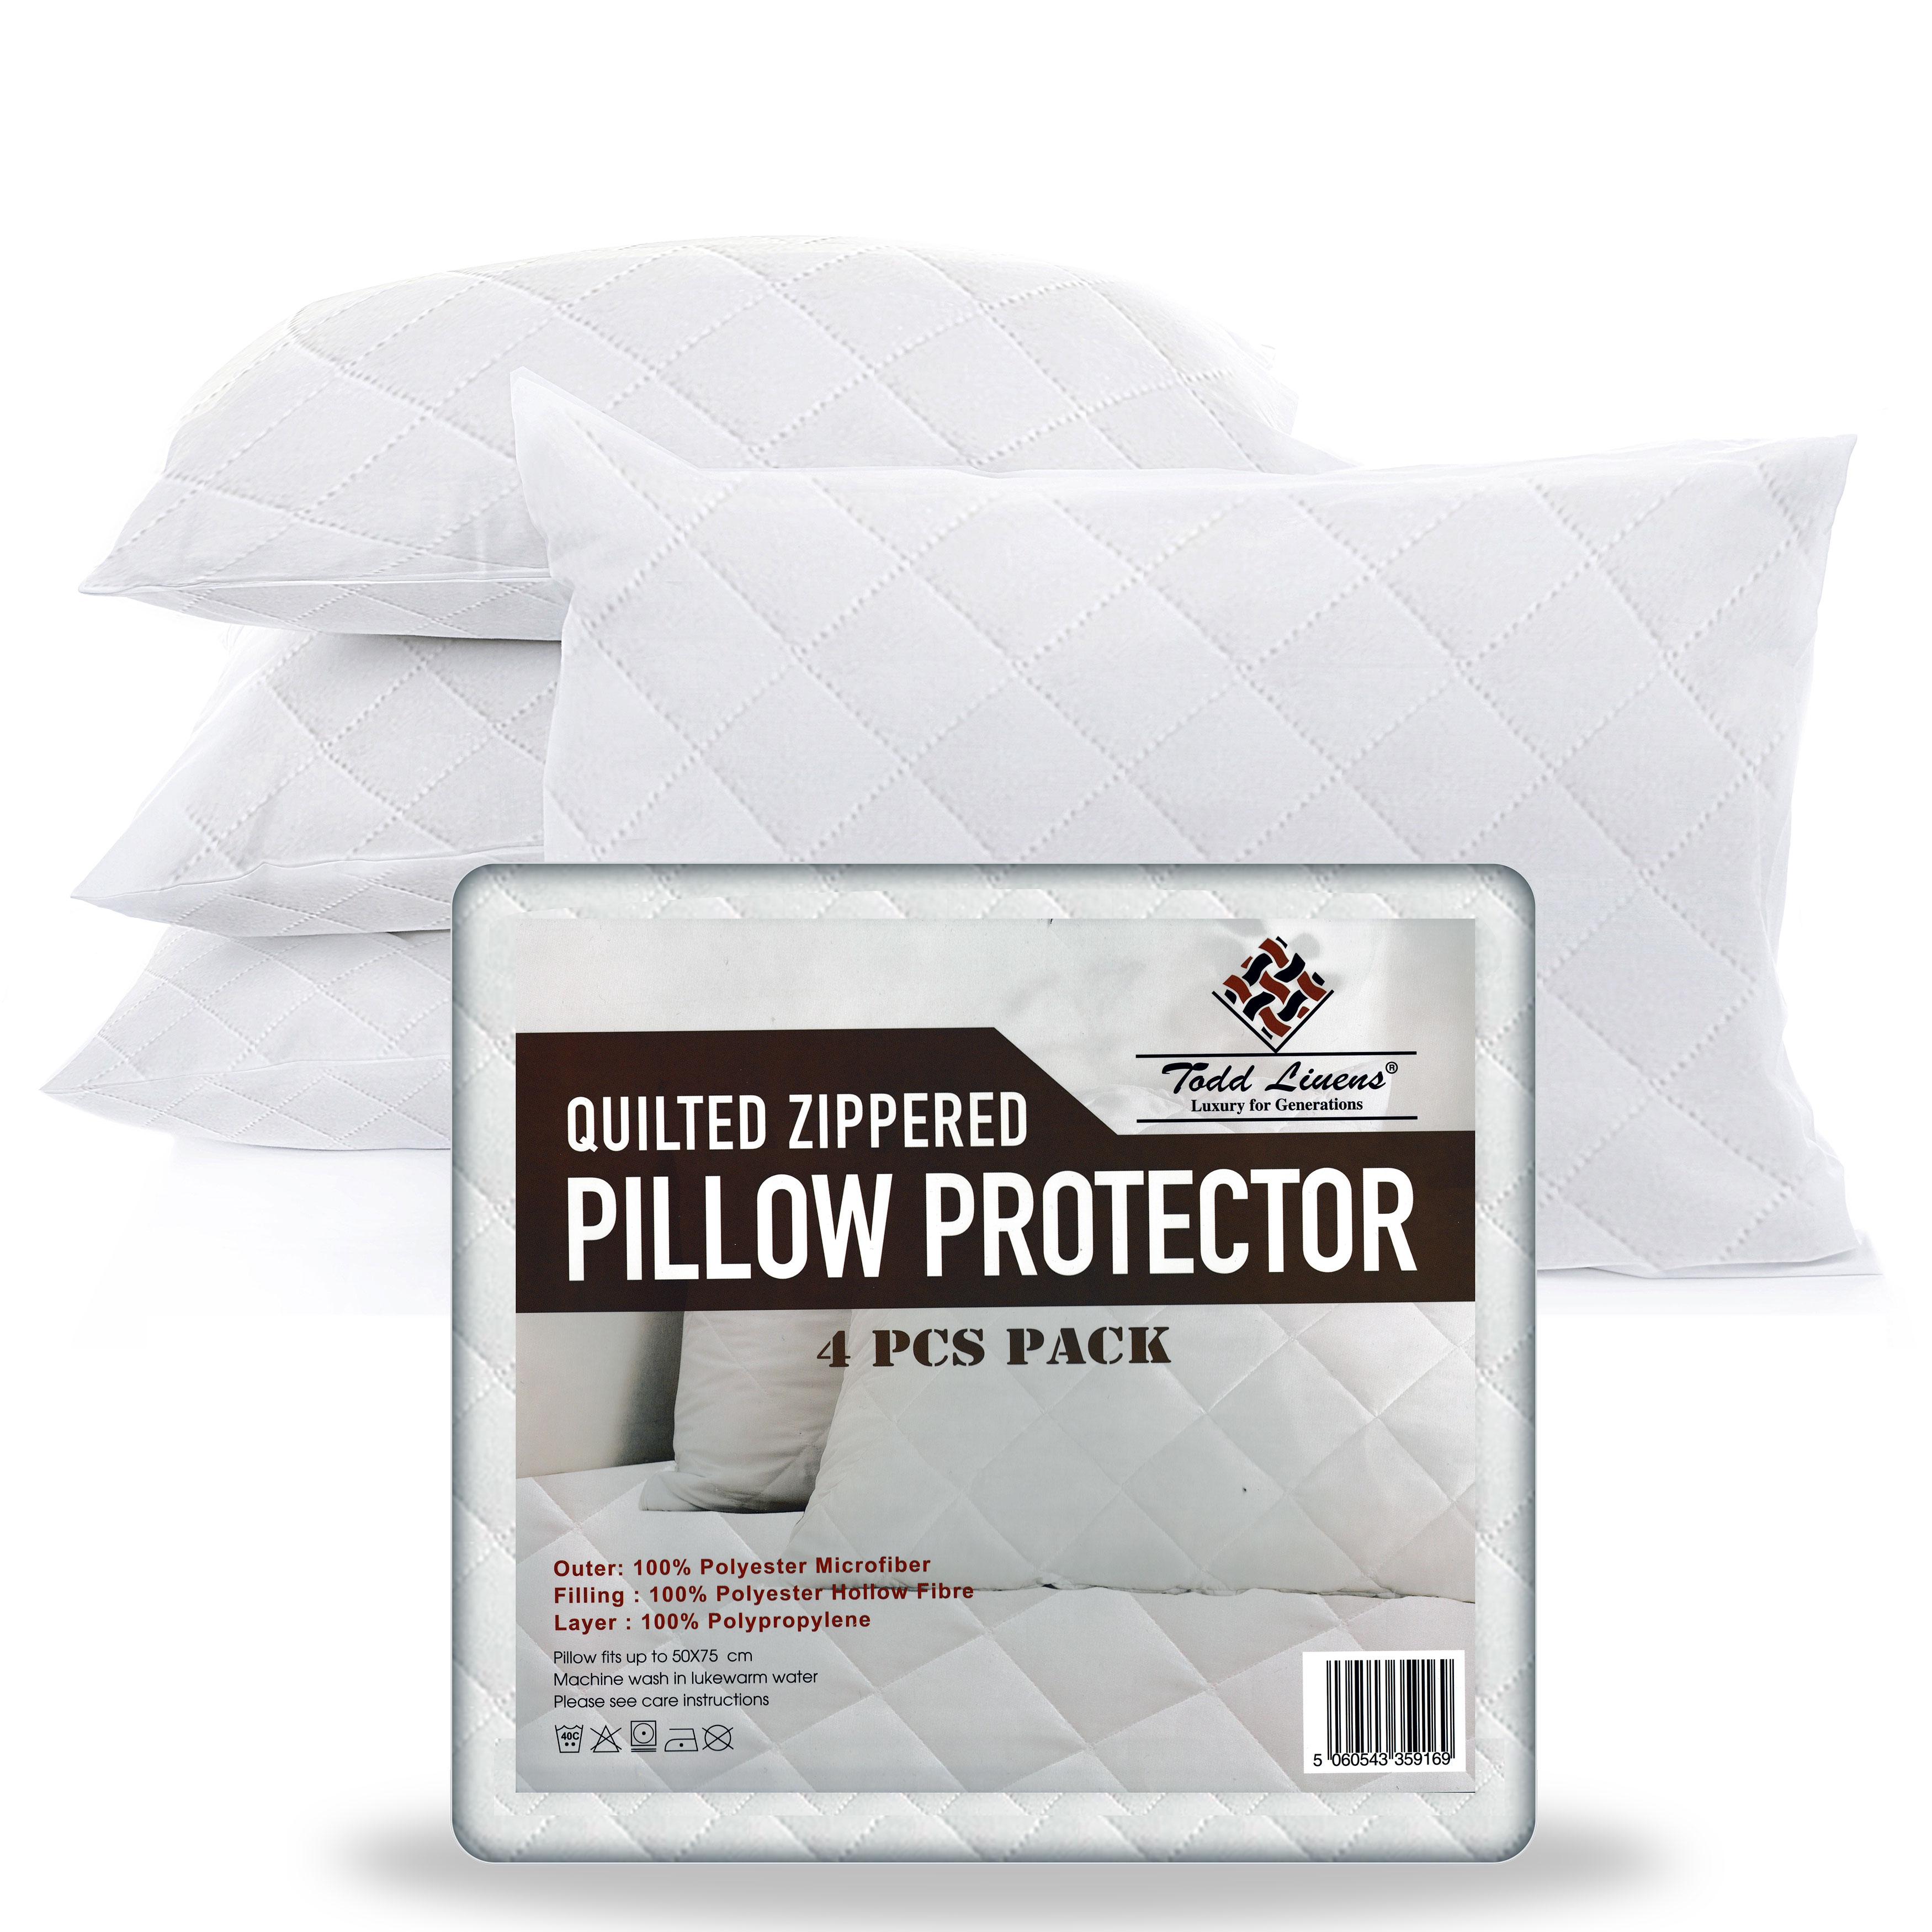 4 Pcs Pack Quilted Zippered Pillow Protector Pillowcase